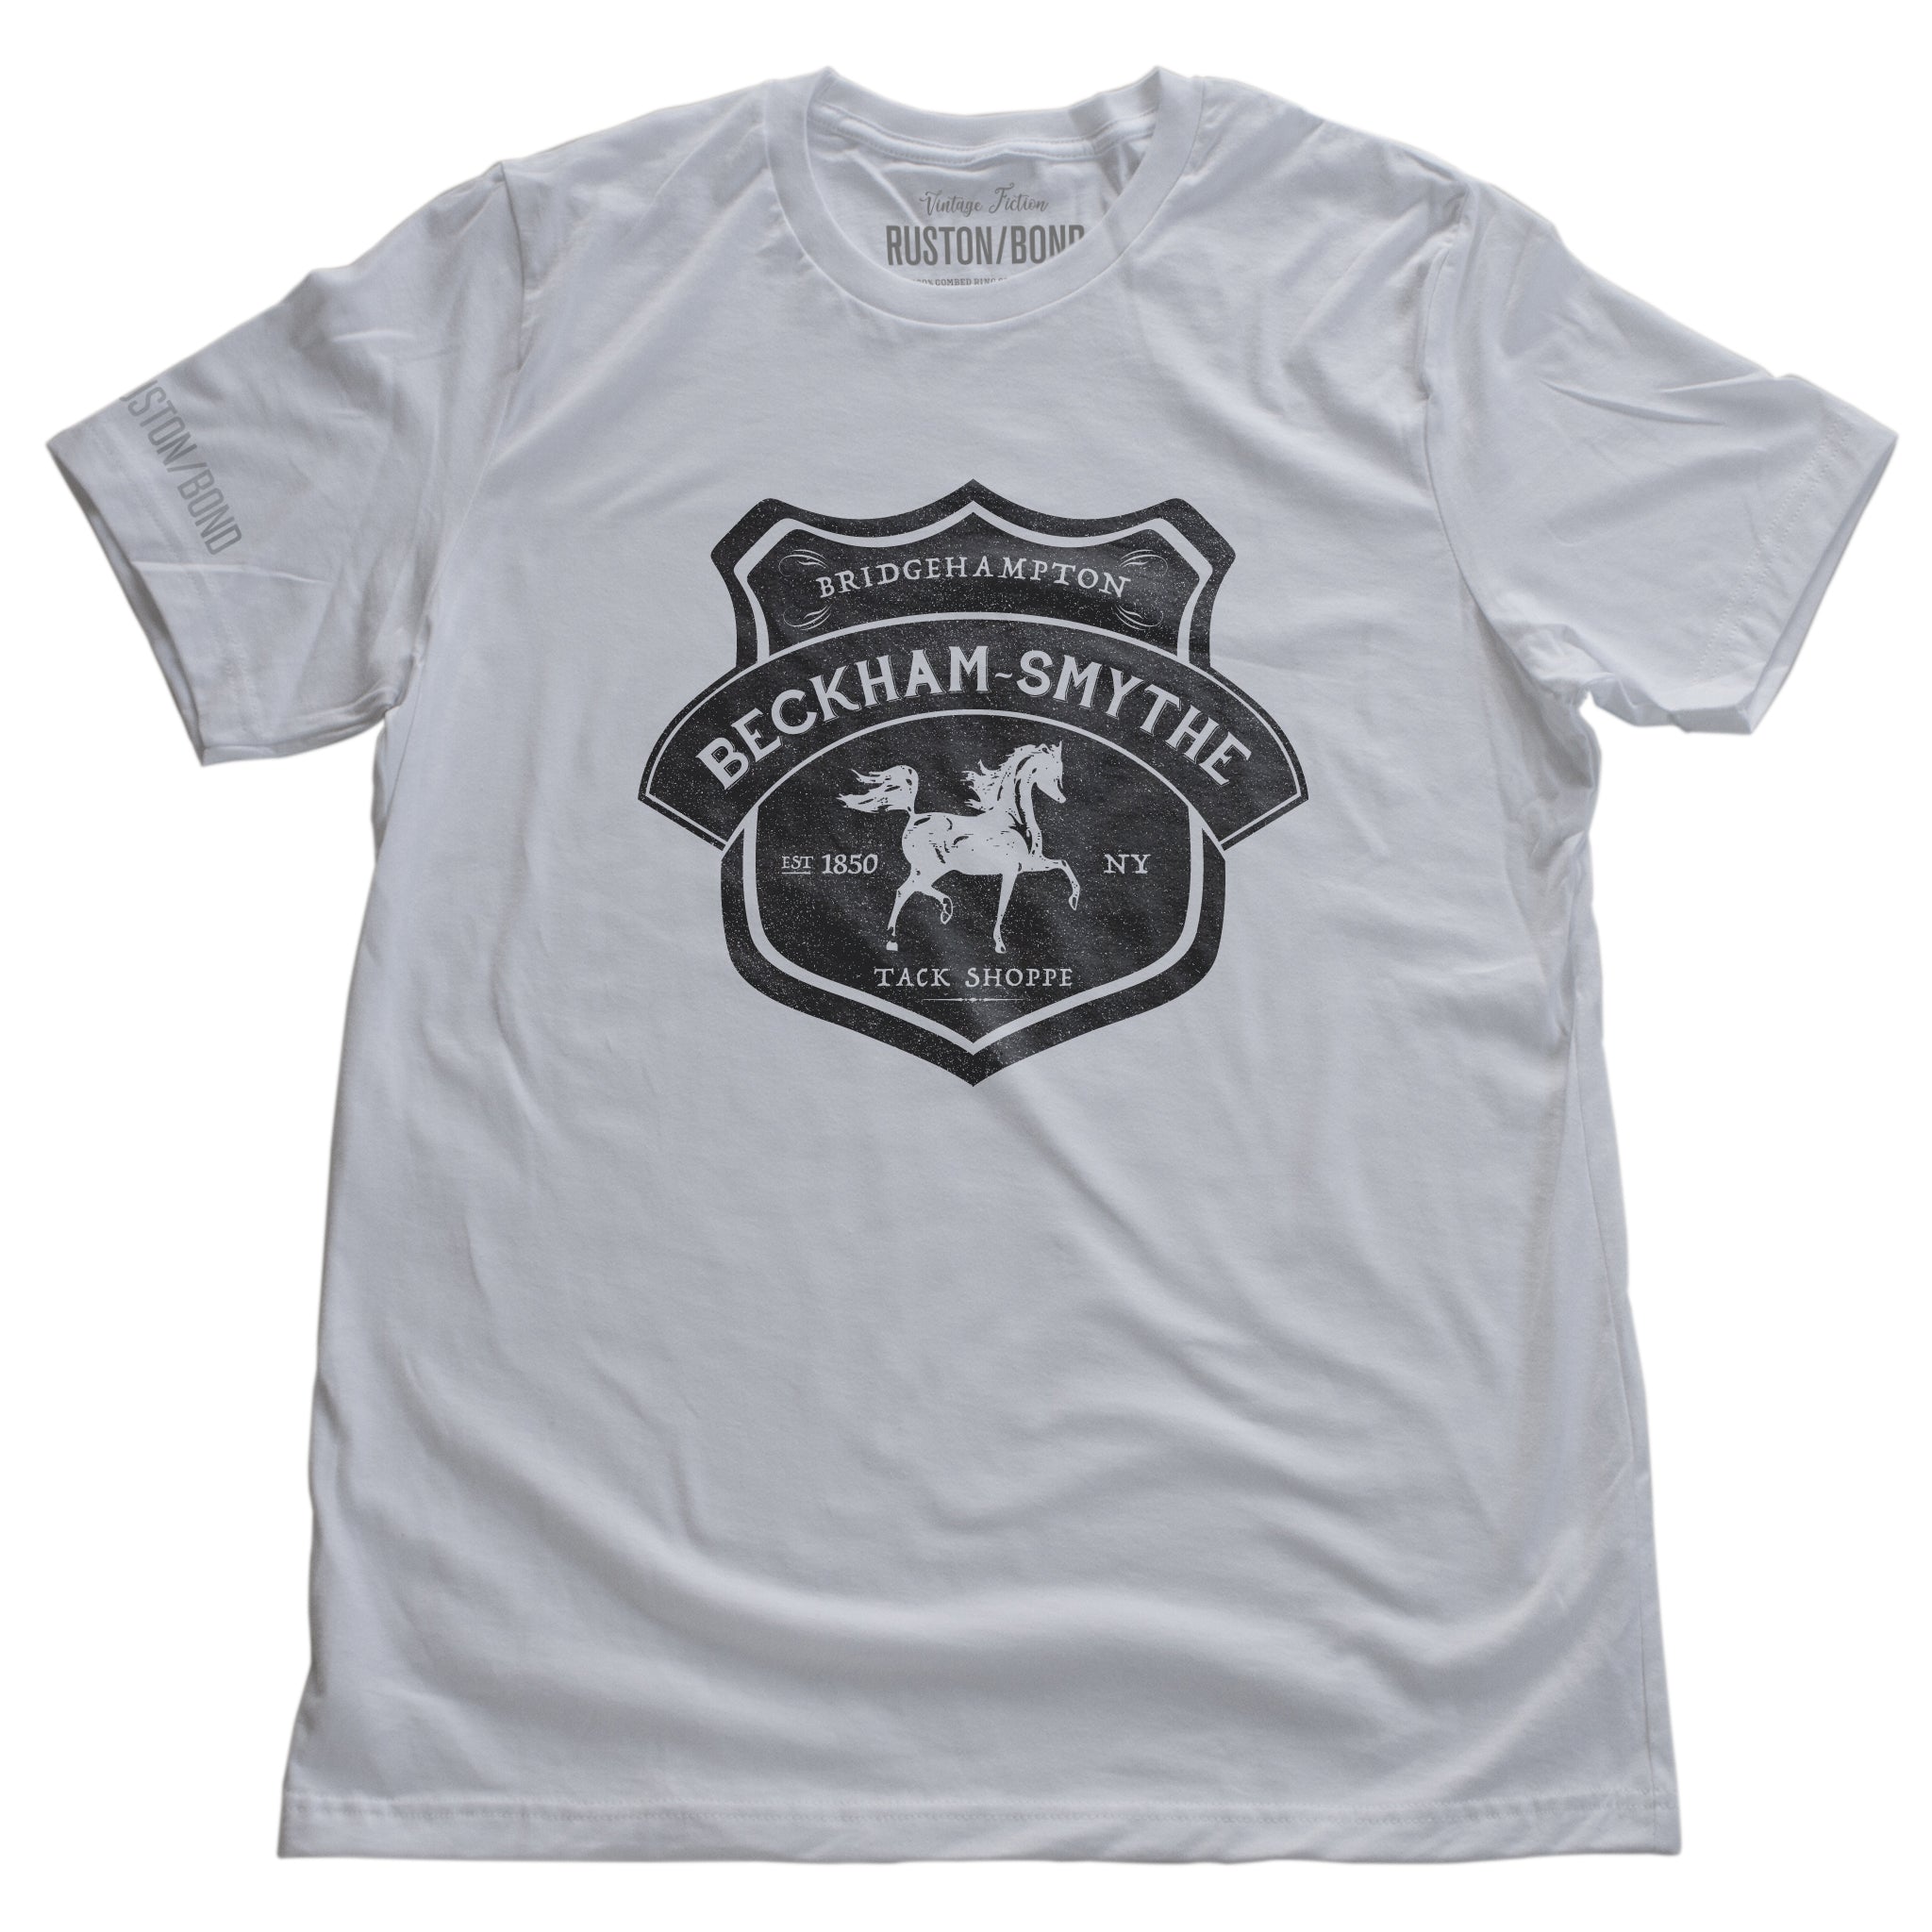 White fashion style, retro, vintage-inspired t-shirt with a classic graphic of a fictional Tack shop in the Hamptons, New York (Bridgehampton). From the stylish brand Ruston/Bond, with a parody of Hermes style.